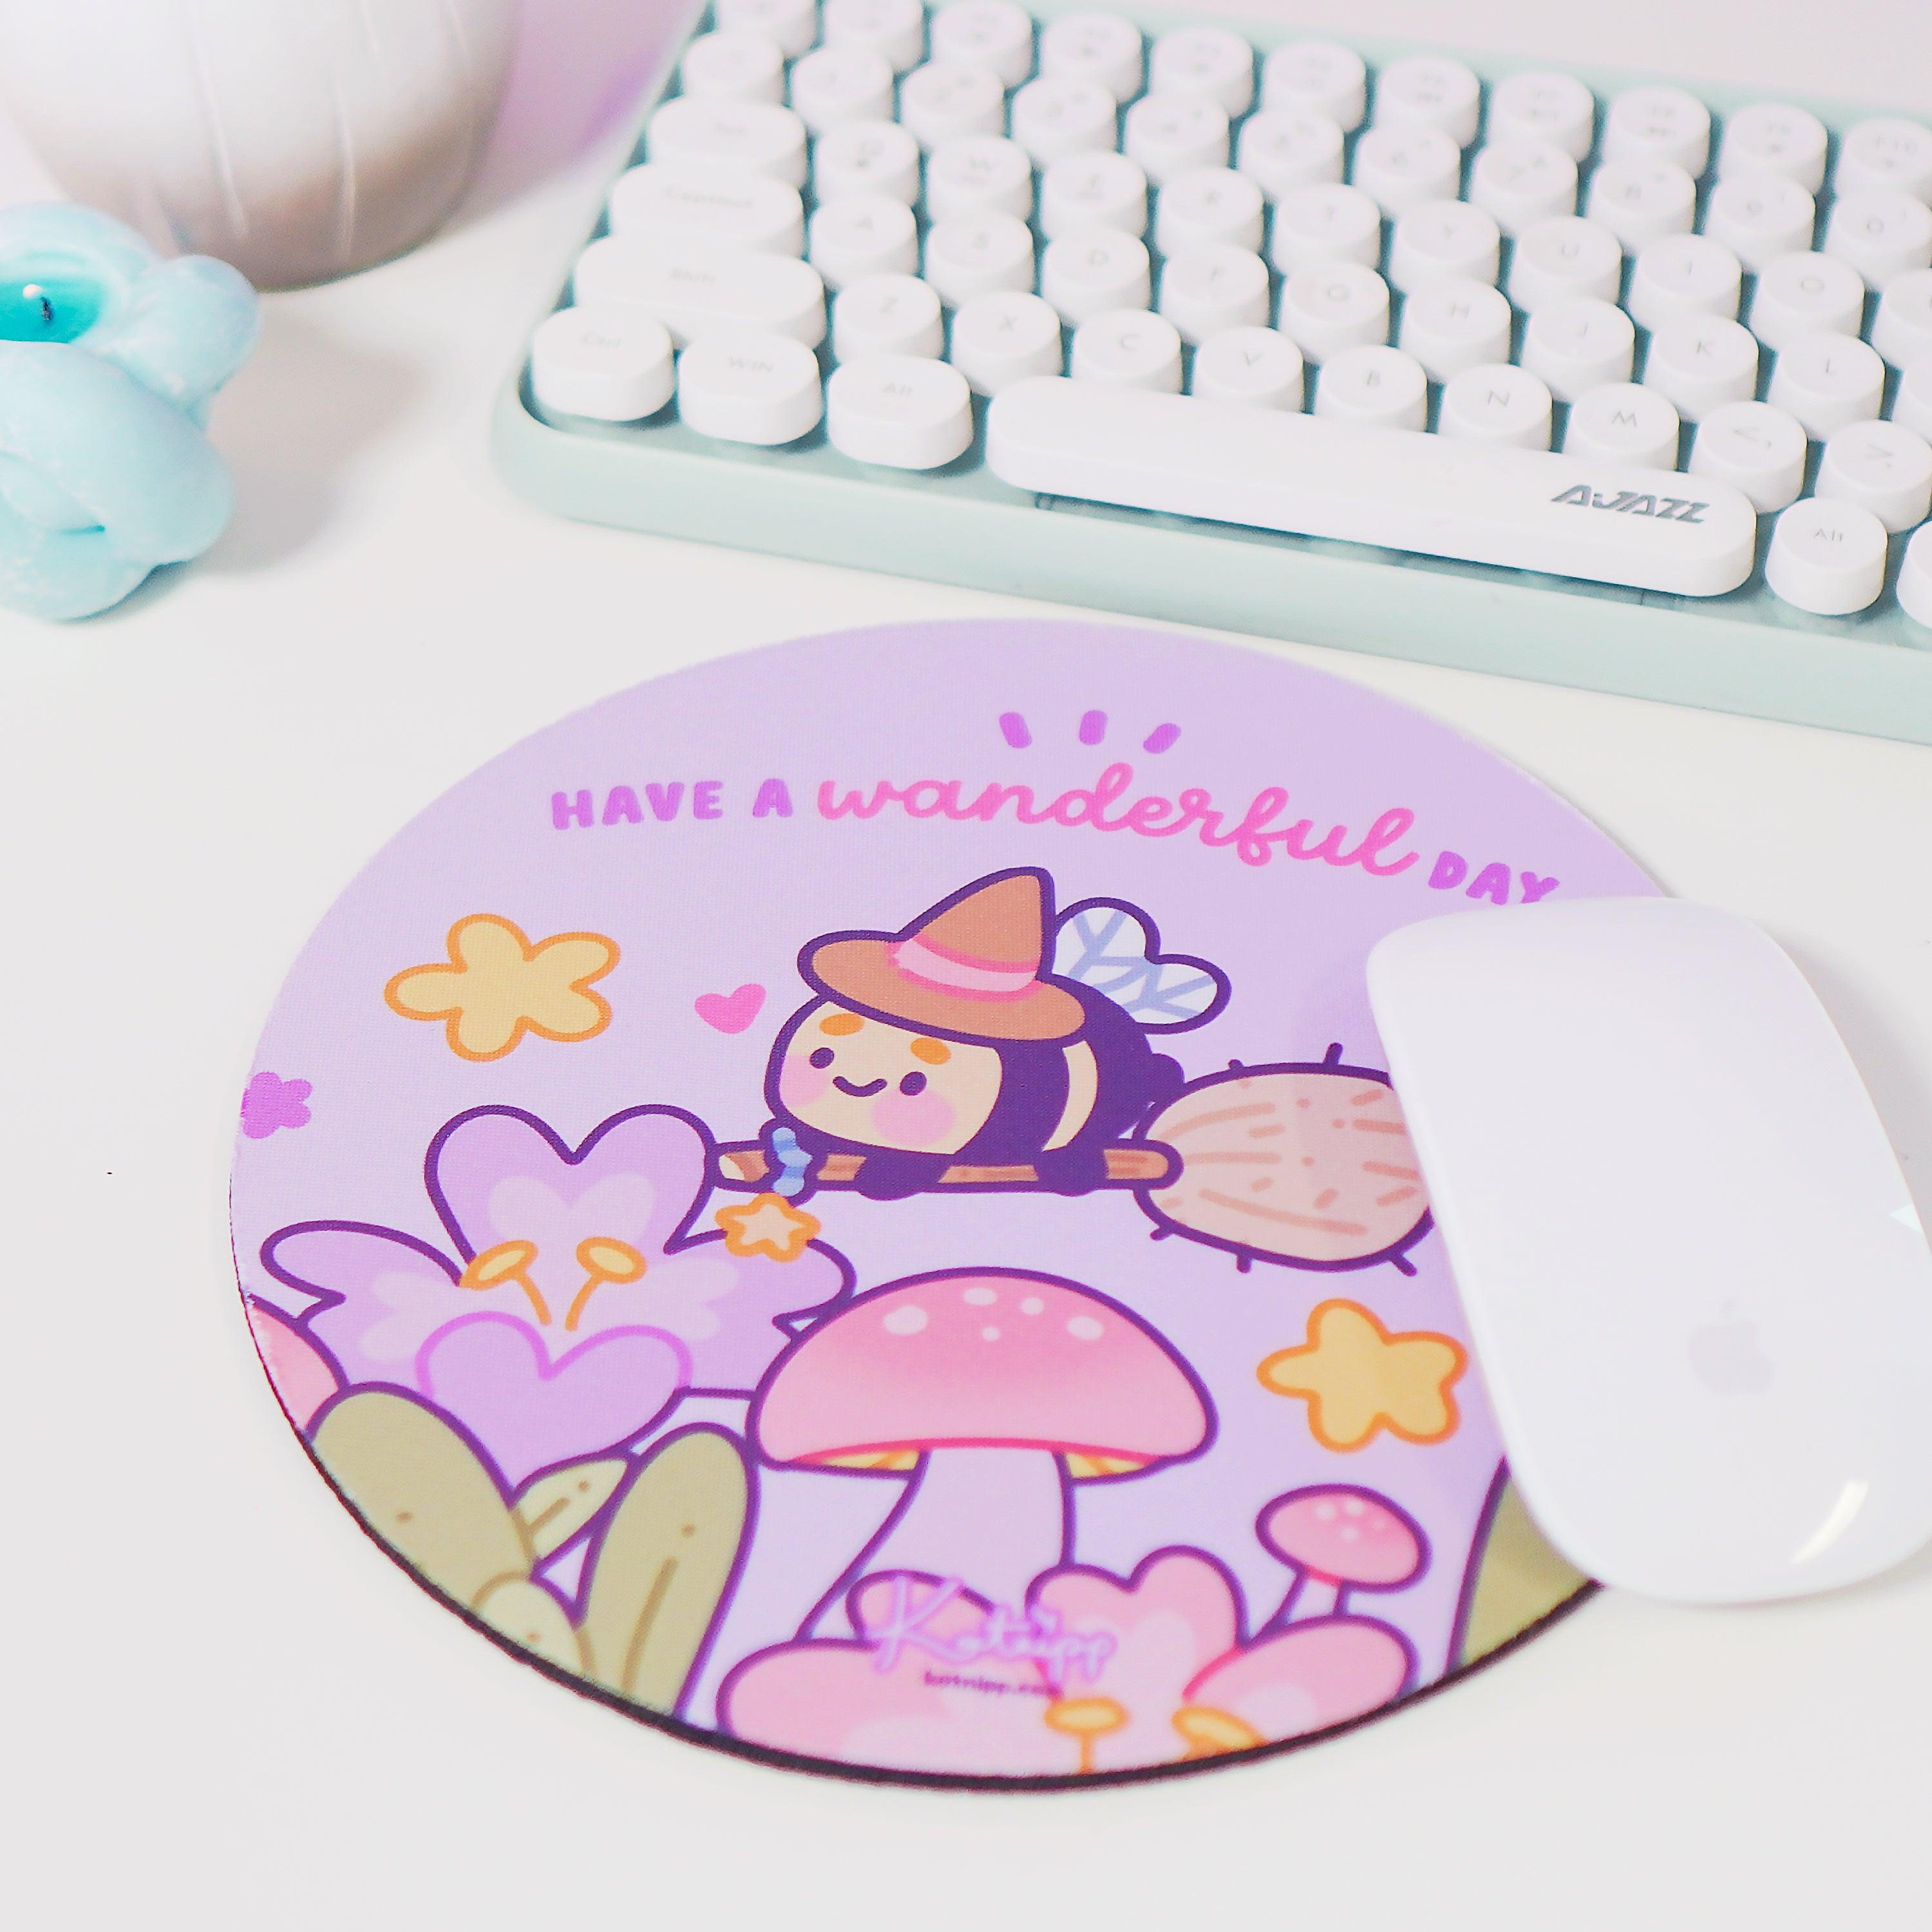 Round Mouse Pads